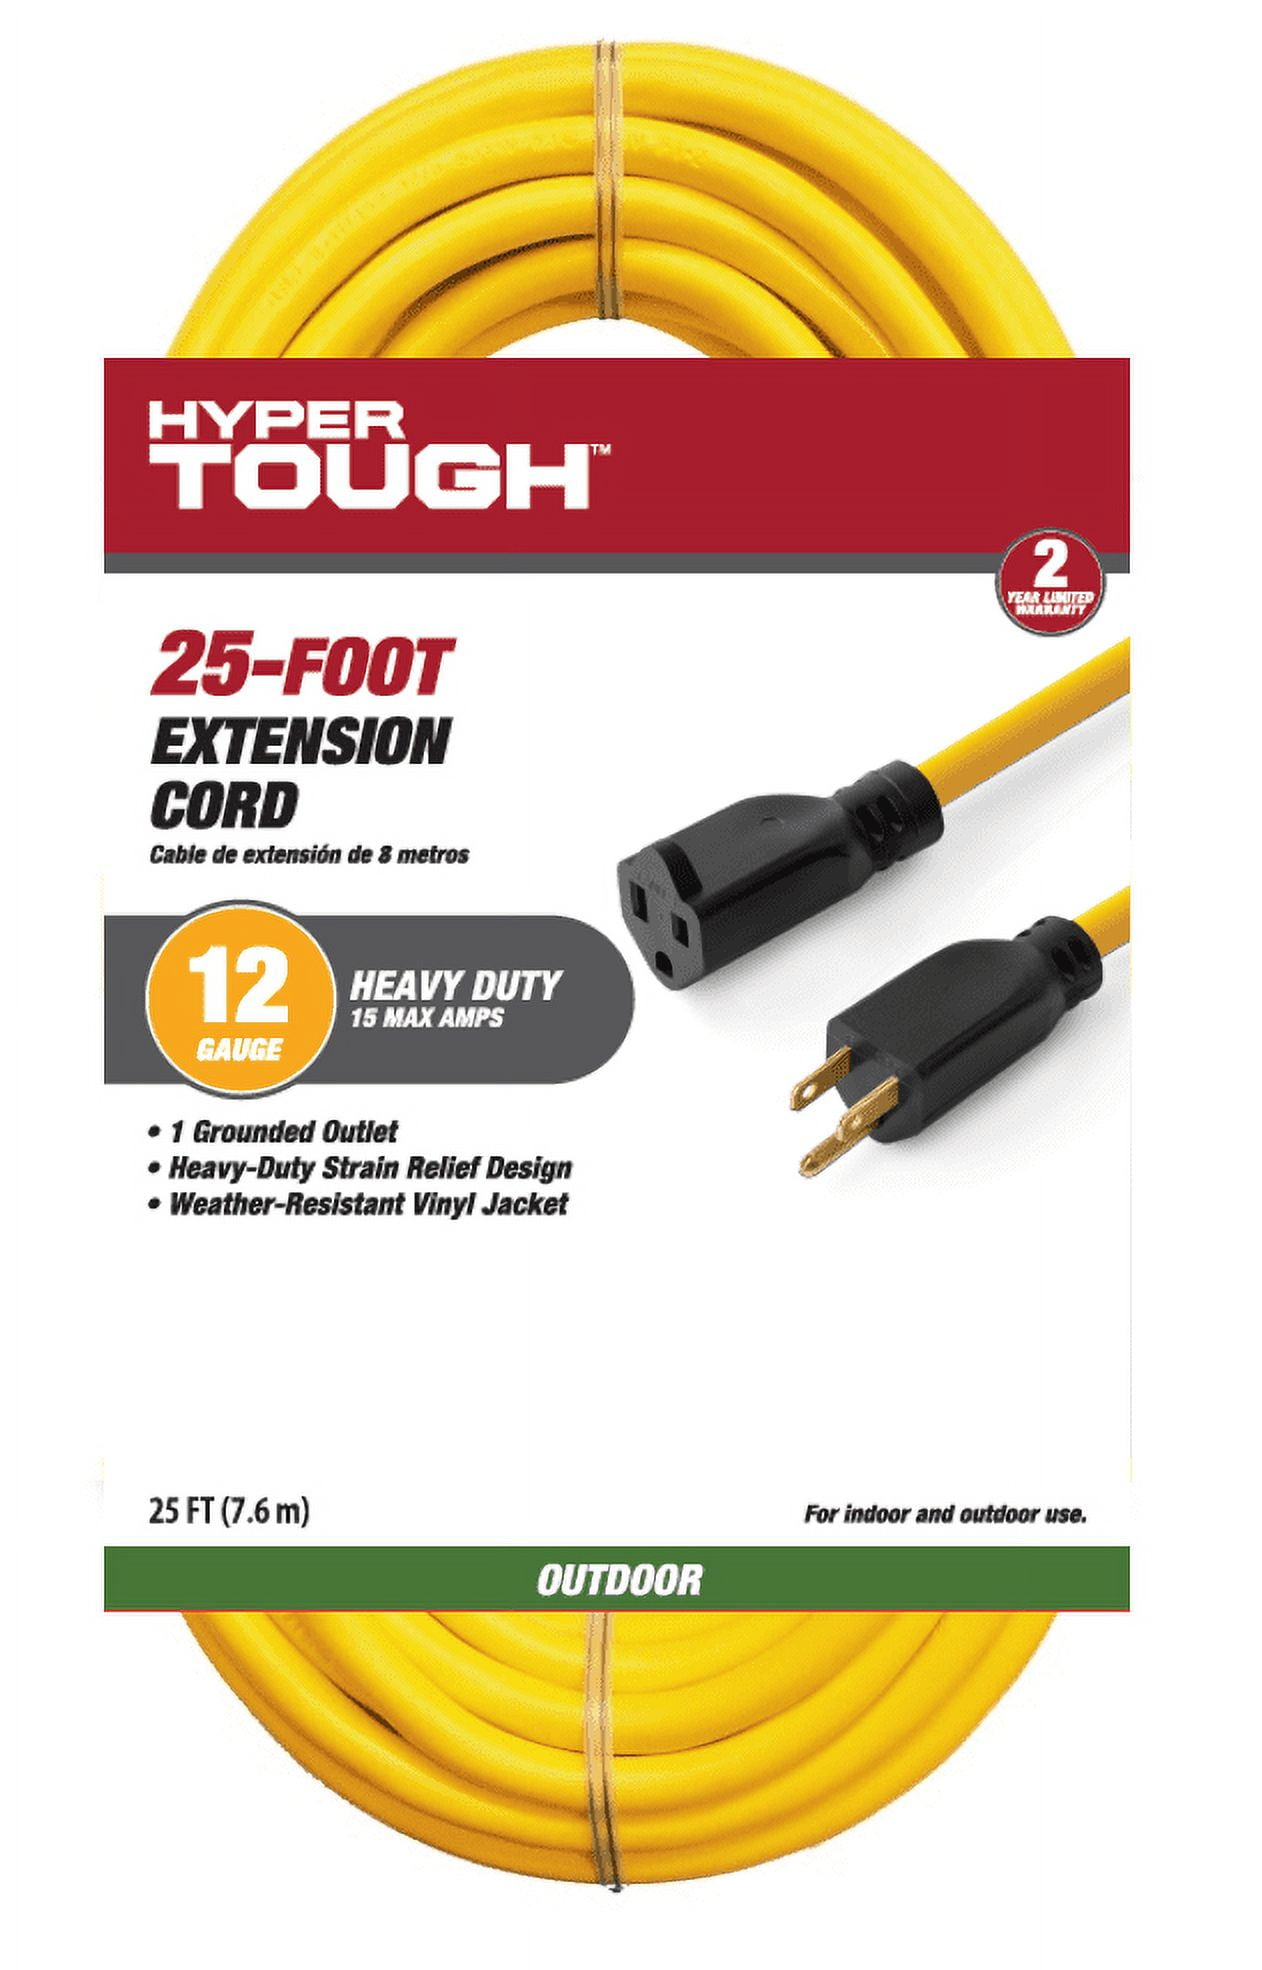 12/3 Gauge, 25 ft SJTW w/ Lighted End Contractor Grade Extension Cord